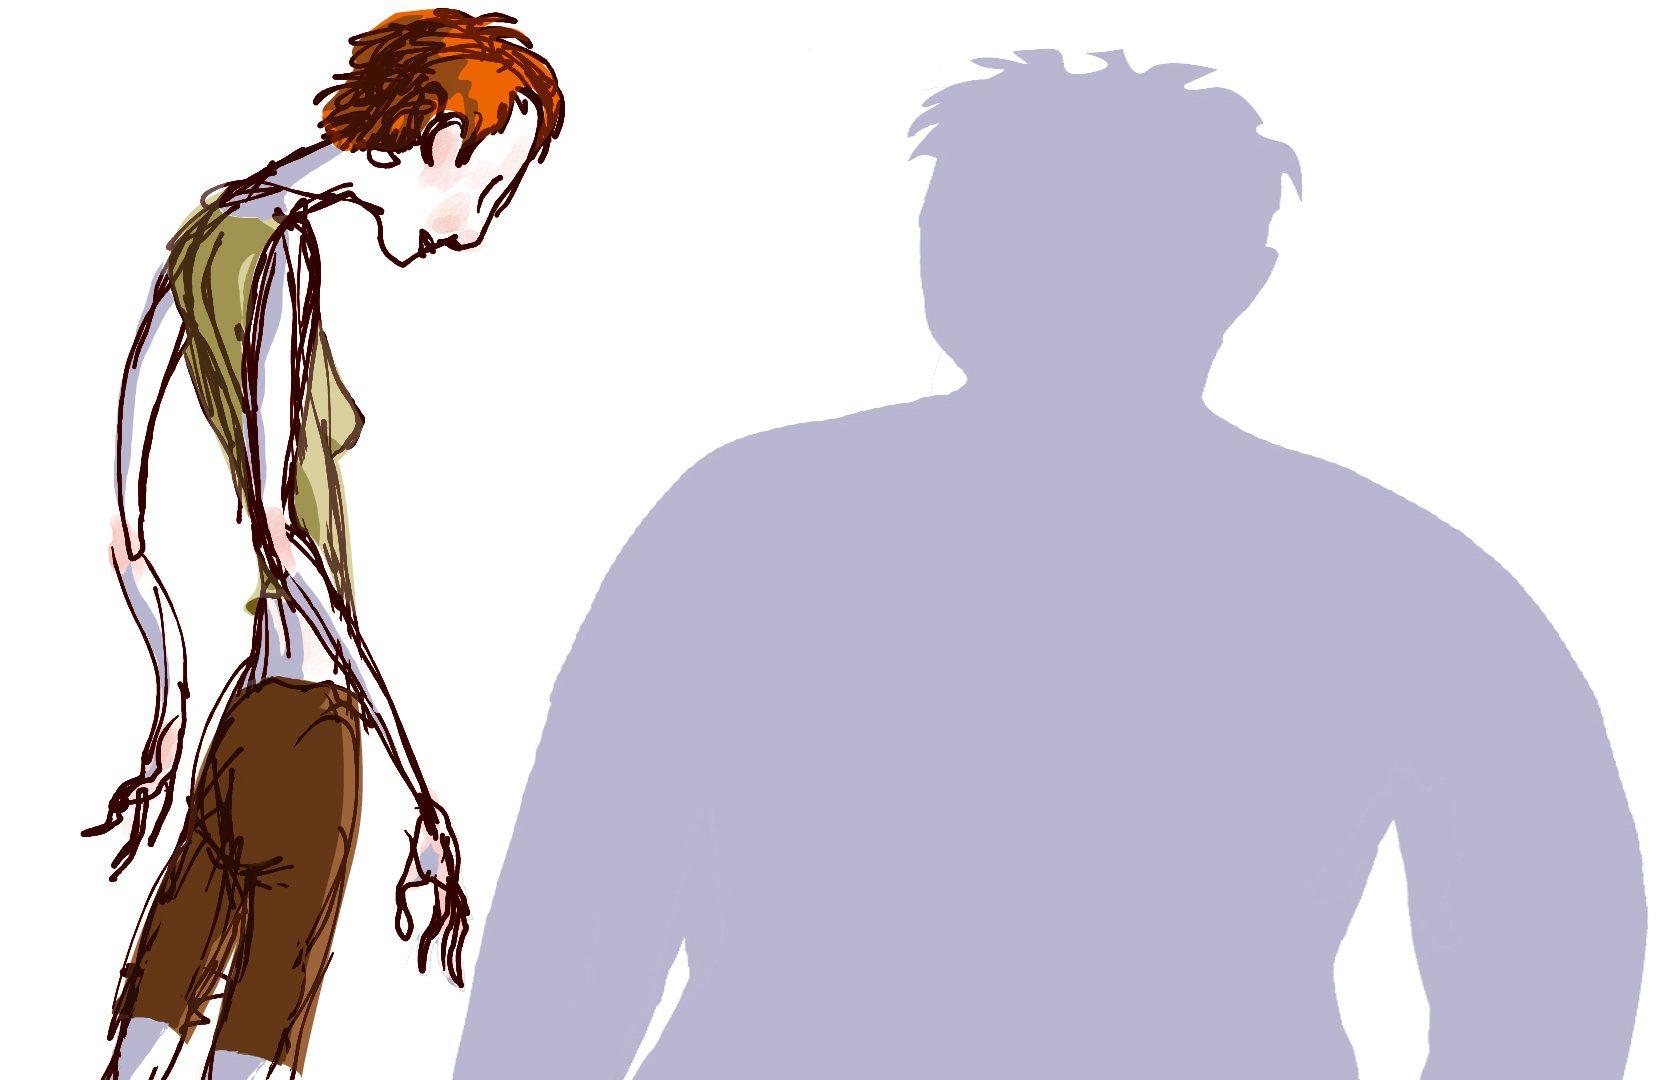 200 dpi 20p x 19p Hector Casanova color illustration of an emaciated young woman standing before her shadow which projects a much larger woman. For use with stories about eating disorders and body image. The Kansas City Star 1999